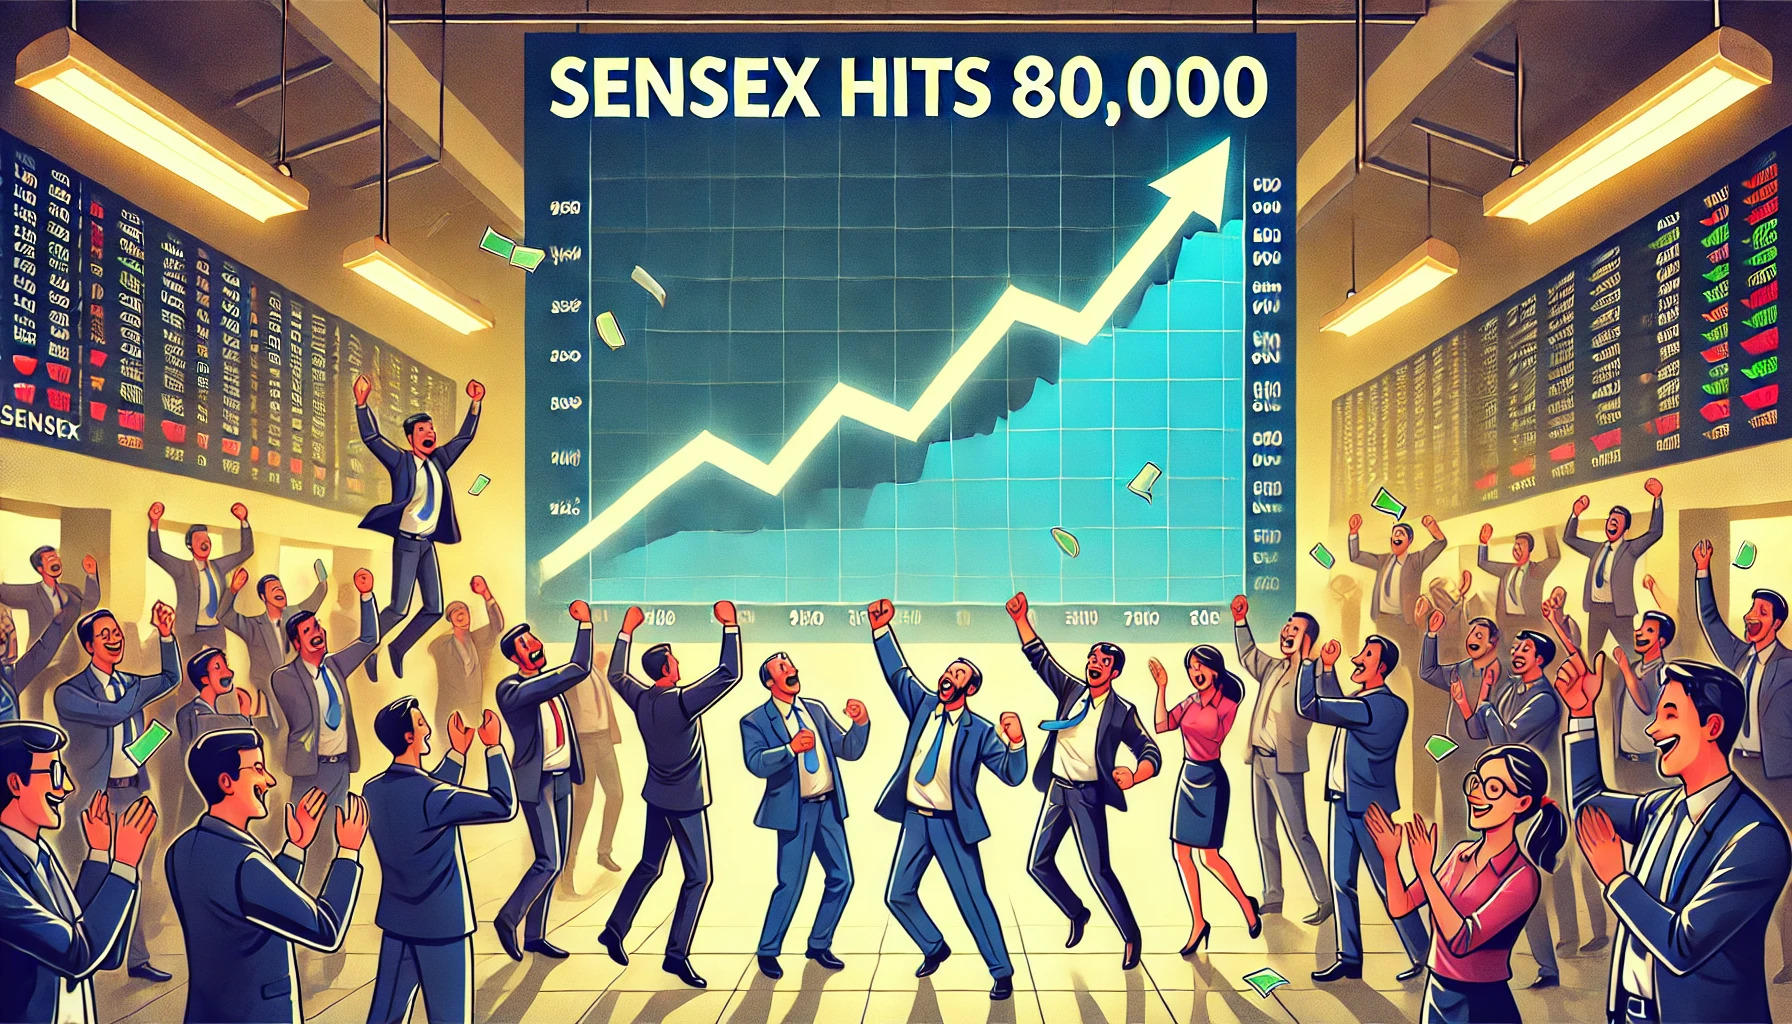 Sensex@80,000: Fastest 10K-point rally in 139 days churns out 20 multibagger stocks 